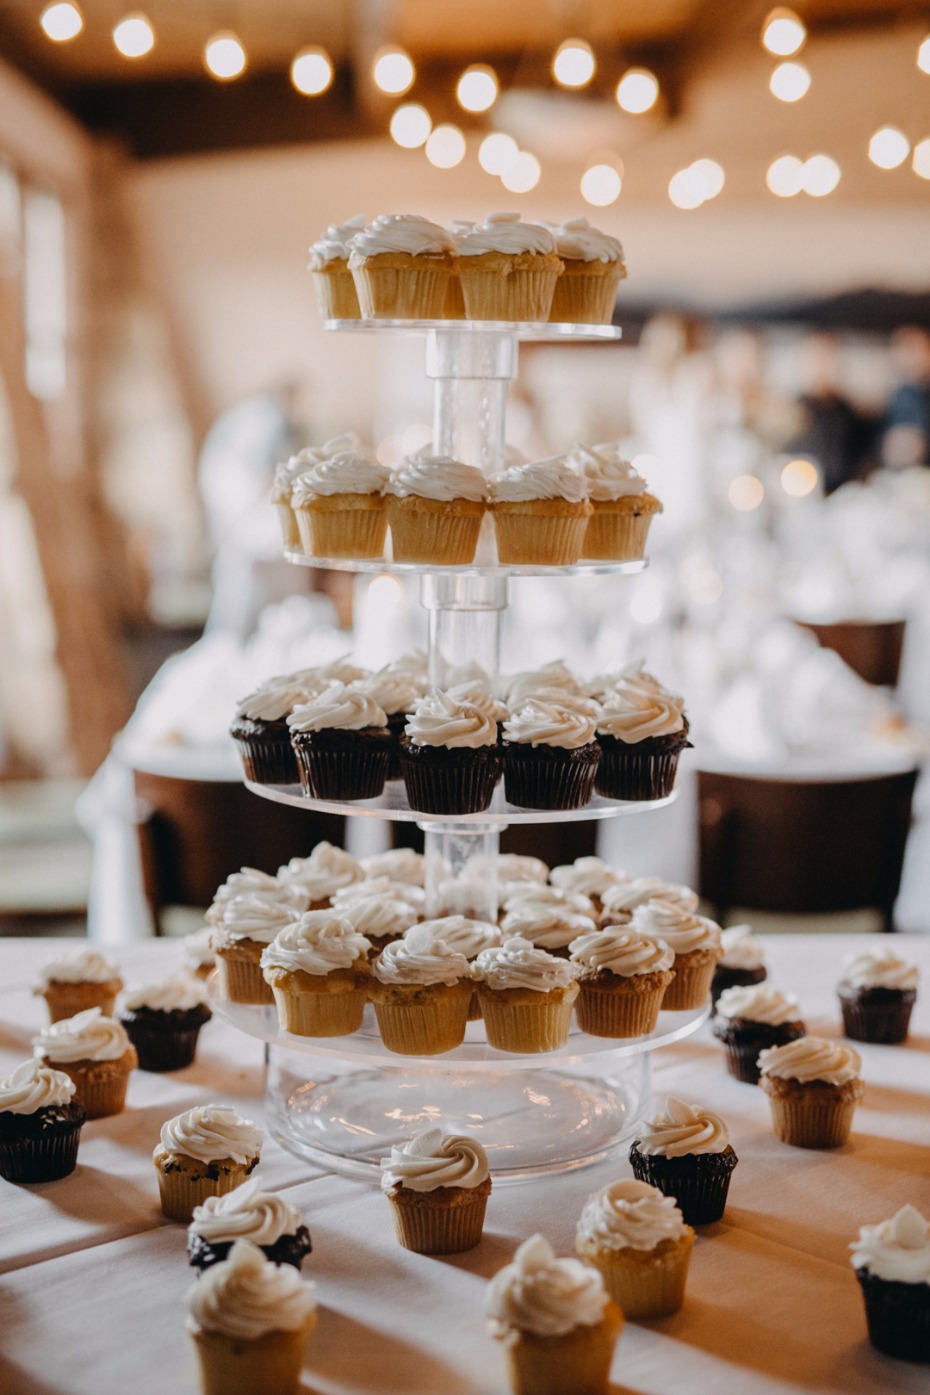 cupcakes instead of a full wedding cake